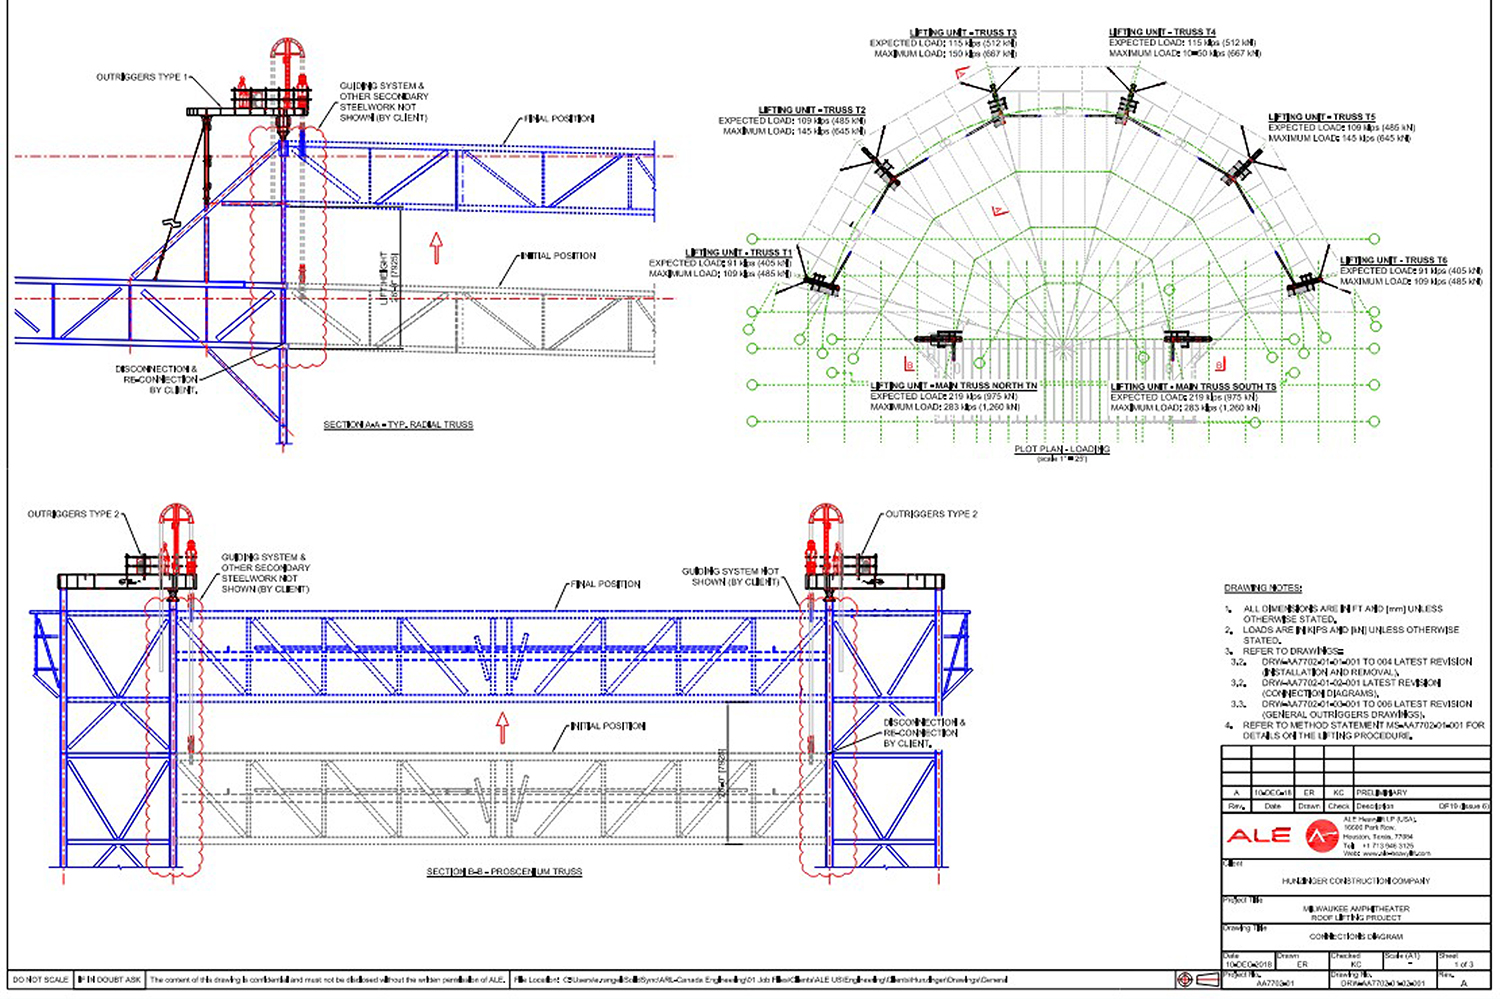 7_Lift plan showing portion of roof to be lifted and lifting frames-credit Mammoet.jpg